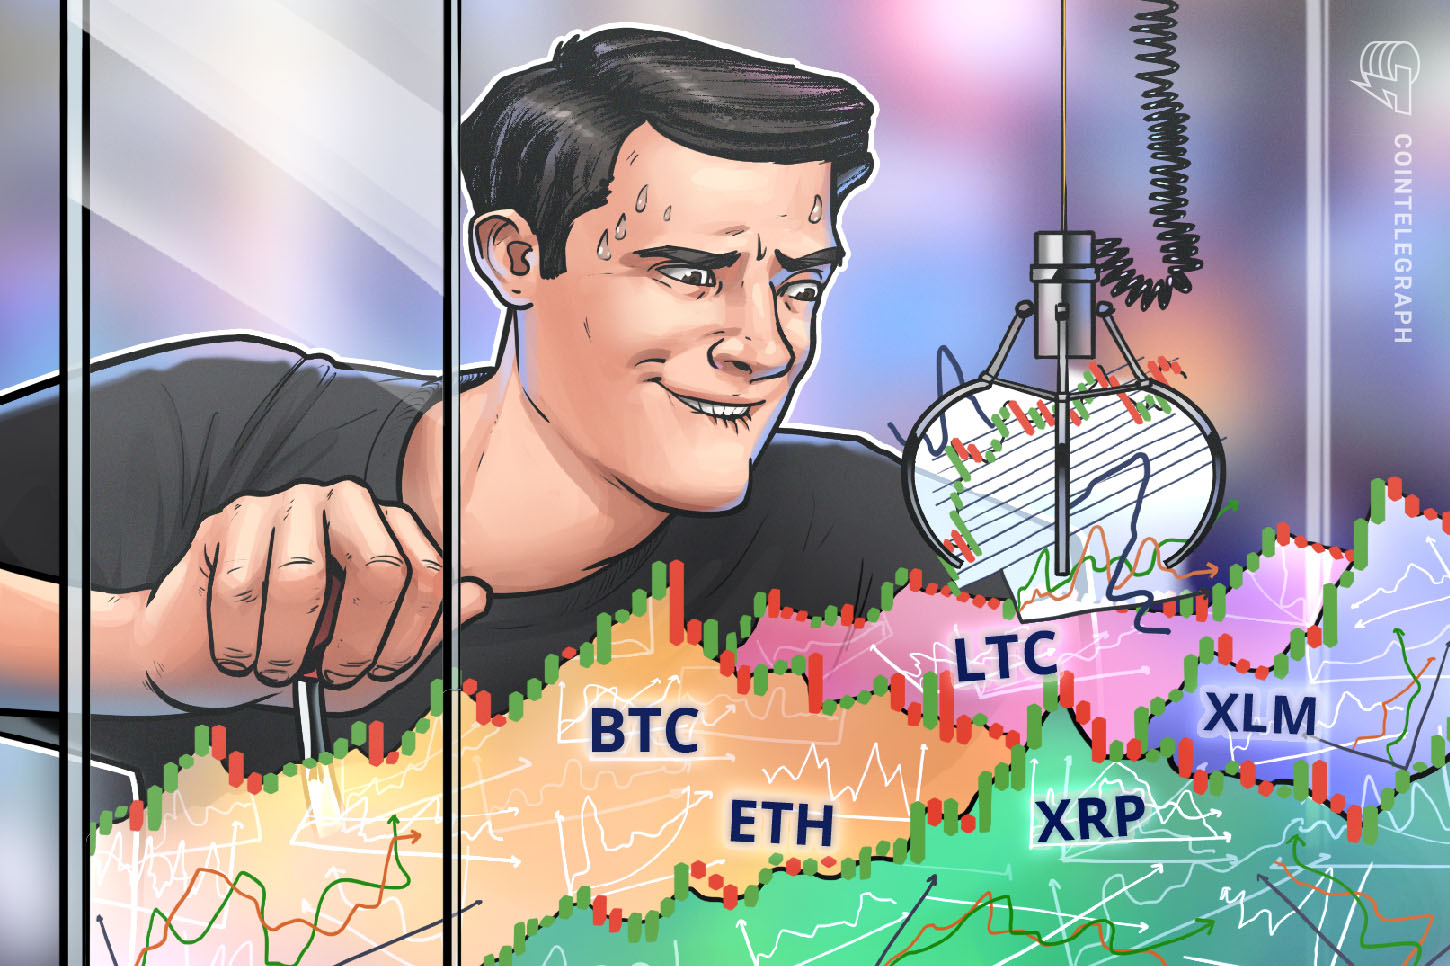 Prime 5 cryptocurrencies to observe this week: BTC, ETH, XRP, LTC, XLM